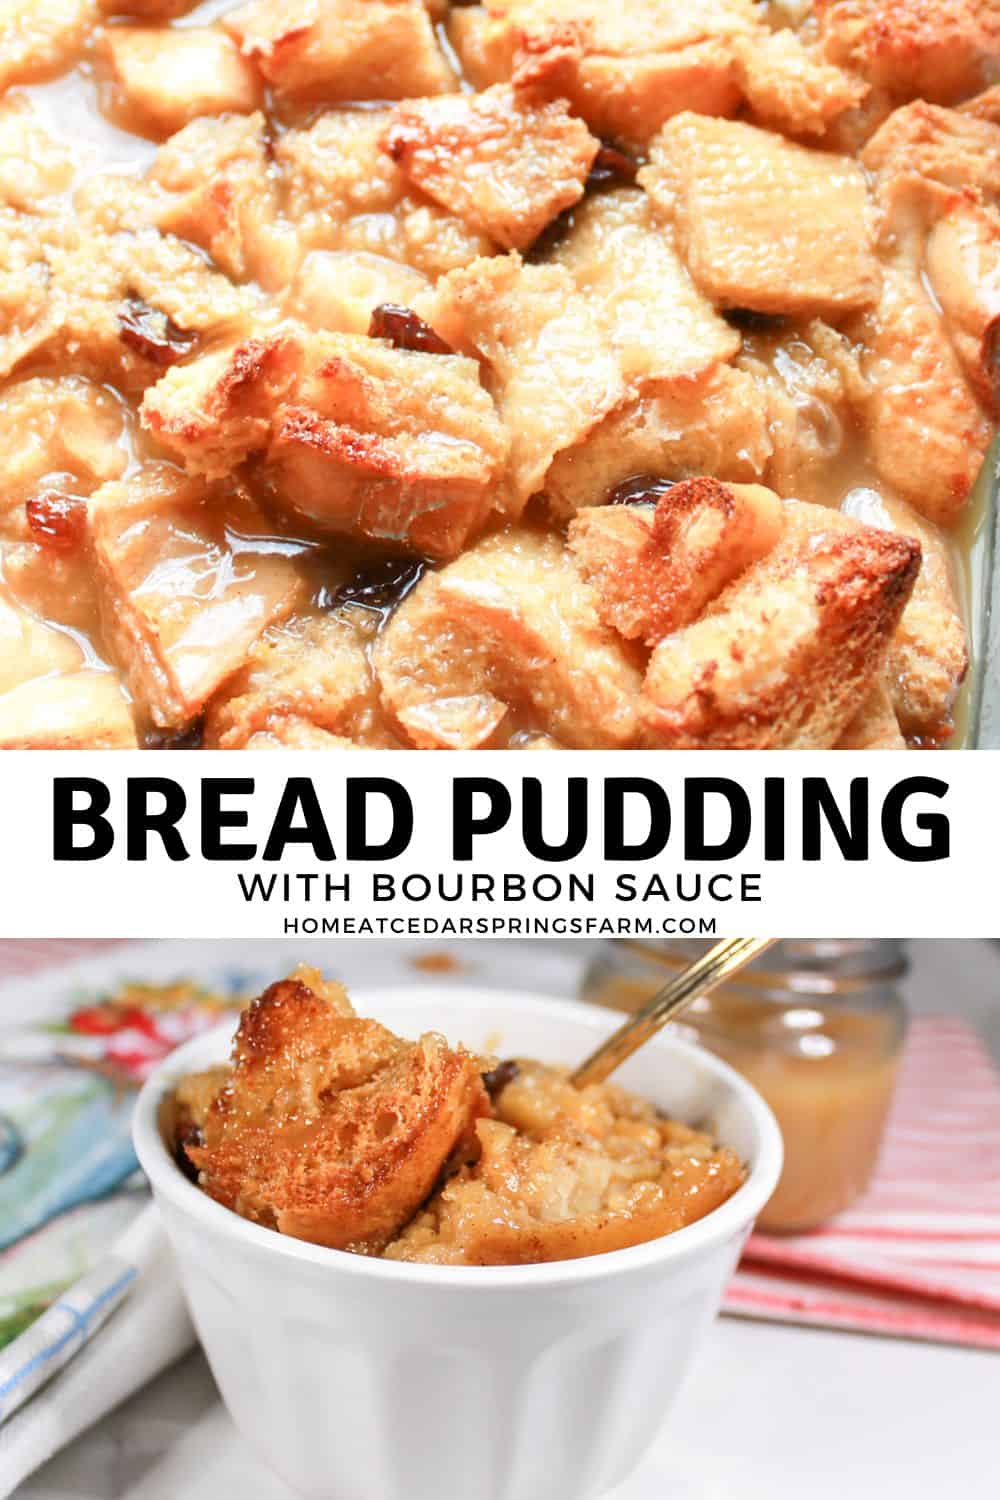 Bread pudding shown in two different dishes with text overlay.